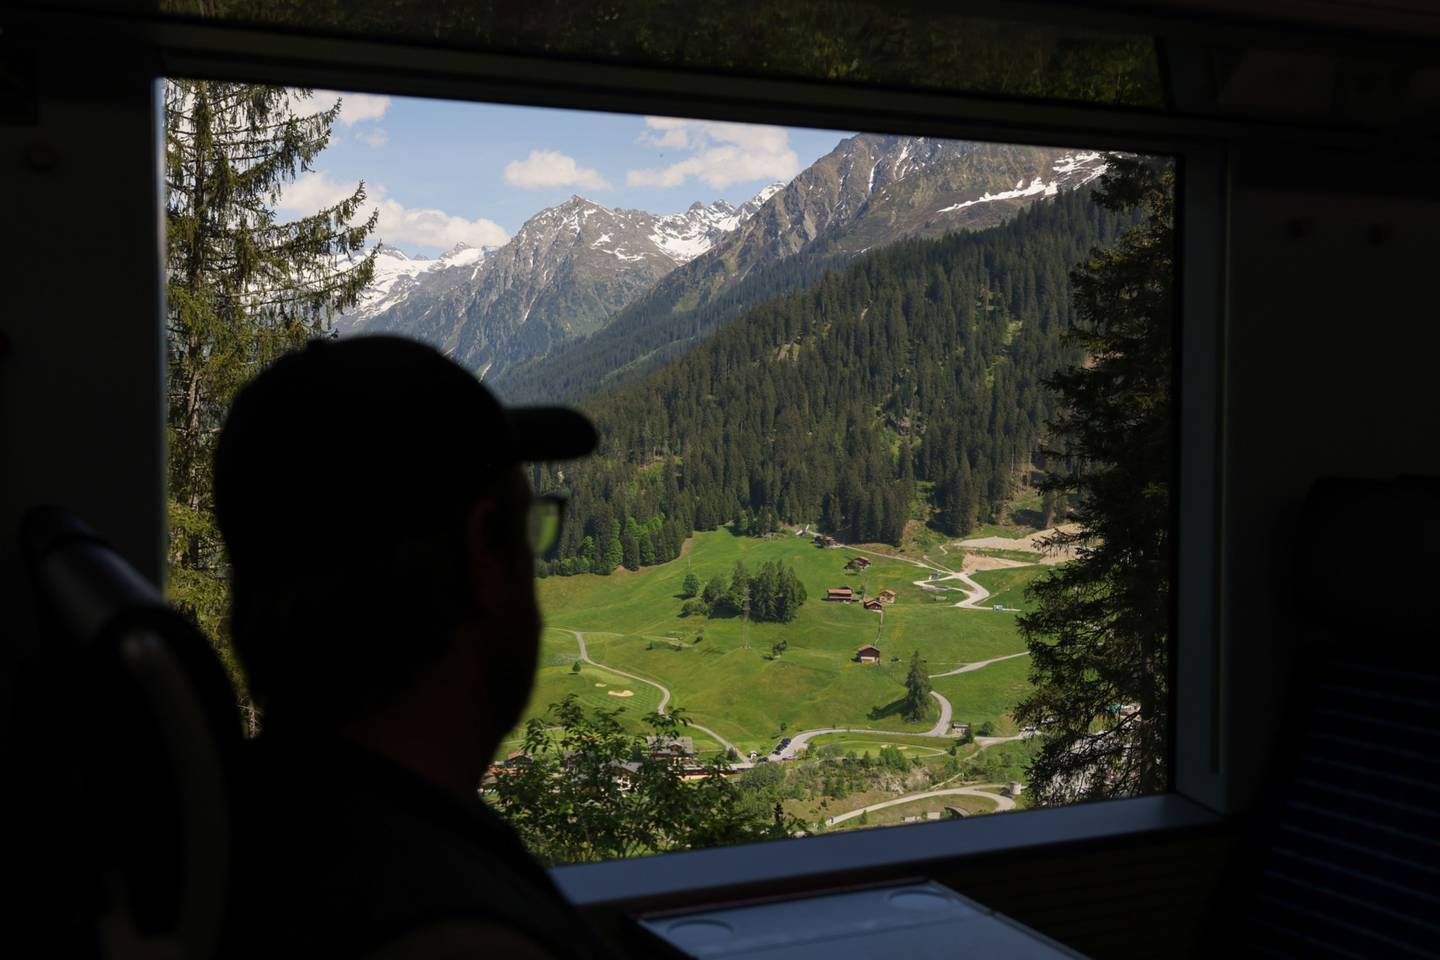 Tthe countryside from a SBB AG train window on its way to the town of Davos, May 21,dfd